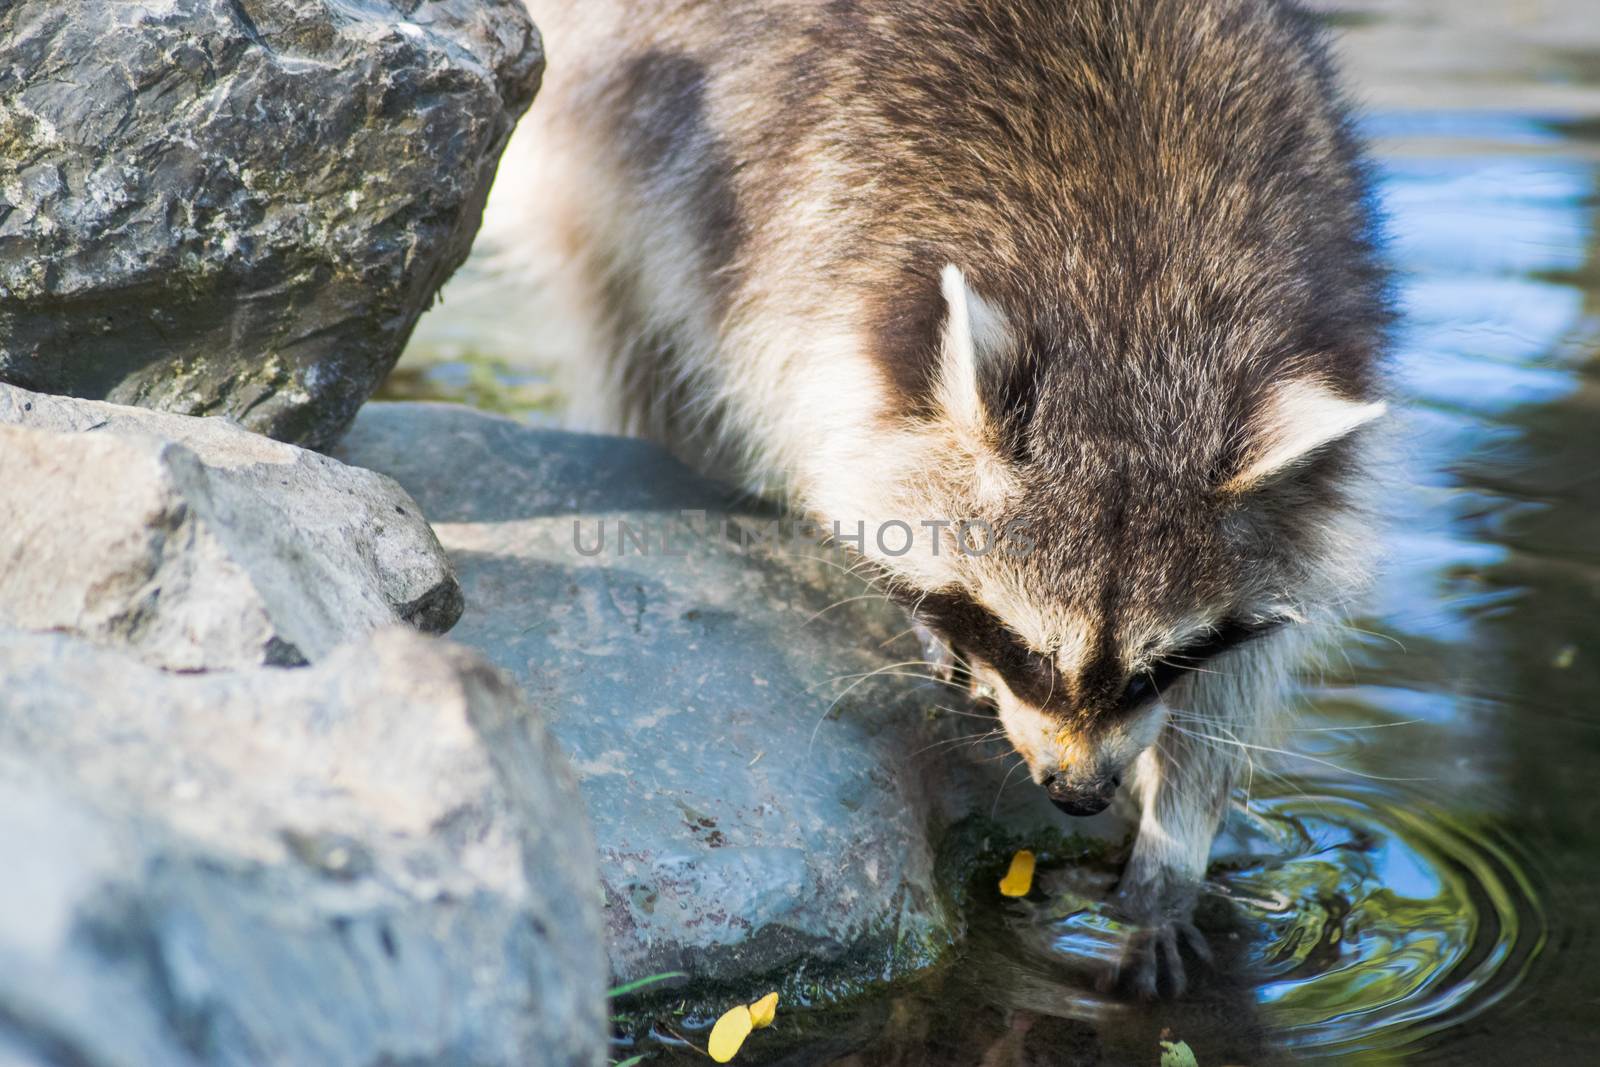 Some raccoons play outside at the river